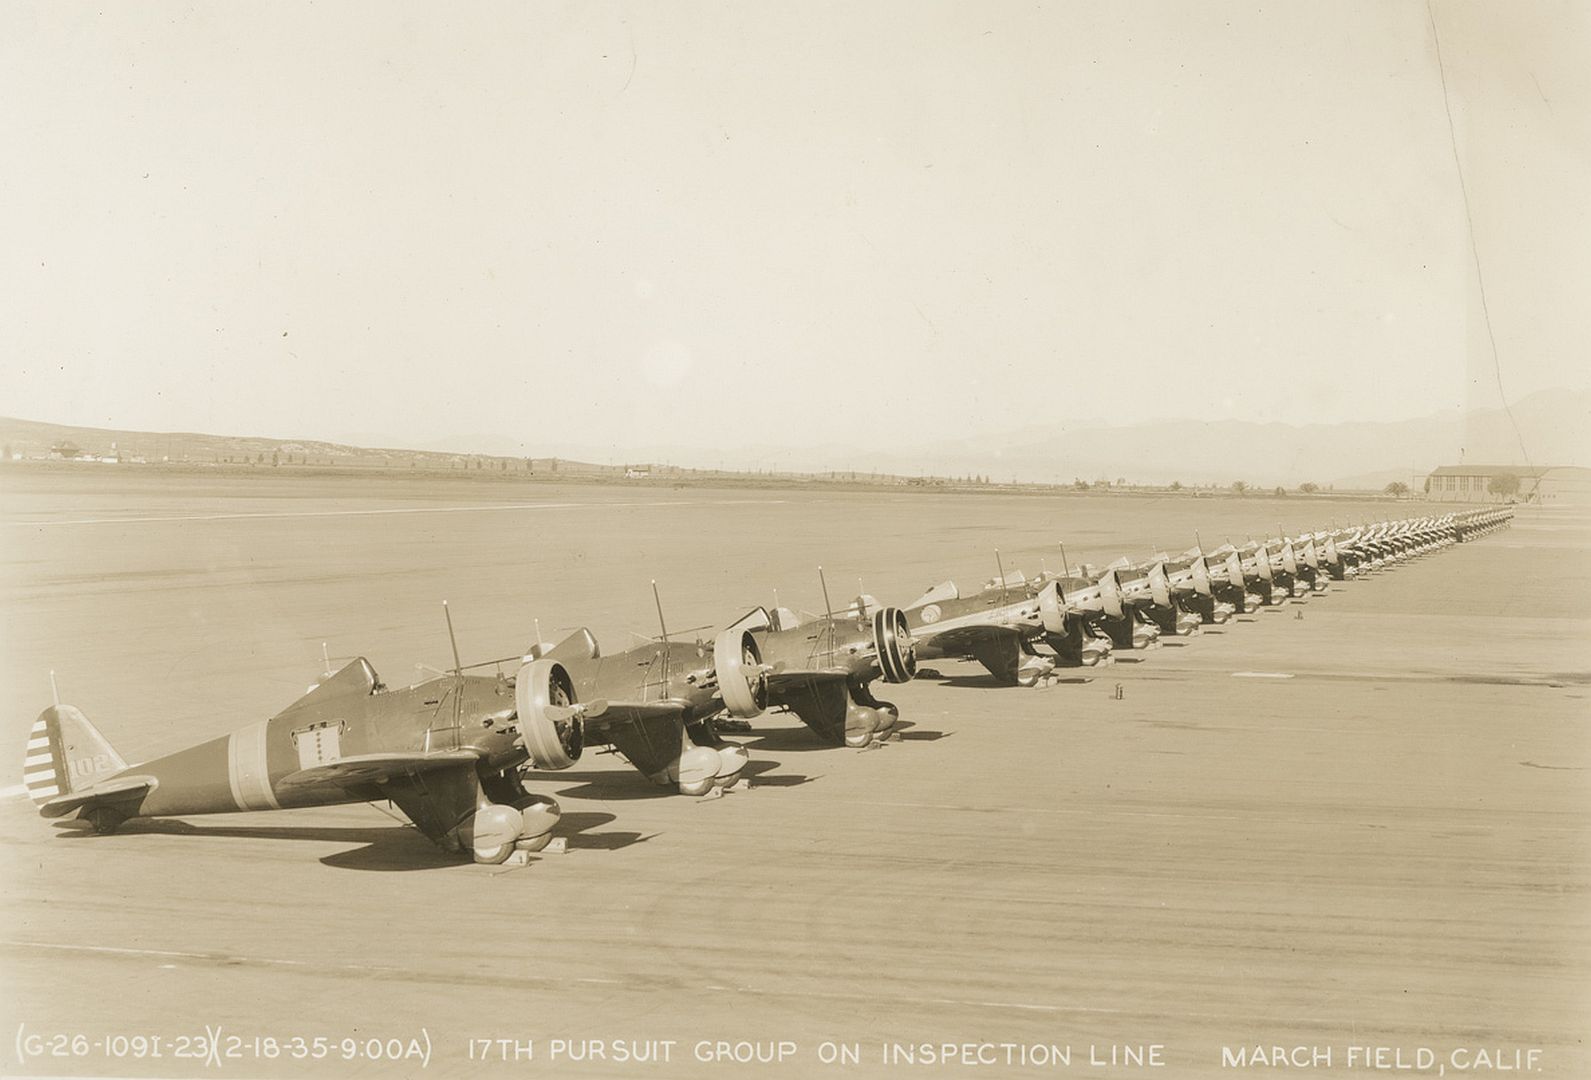 26 Aircraft Of The 17th Pursuit Group United States Army Air Corps Parked On The Inspection Line March Field California February 18 1935